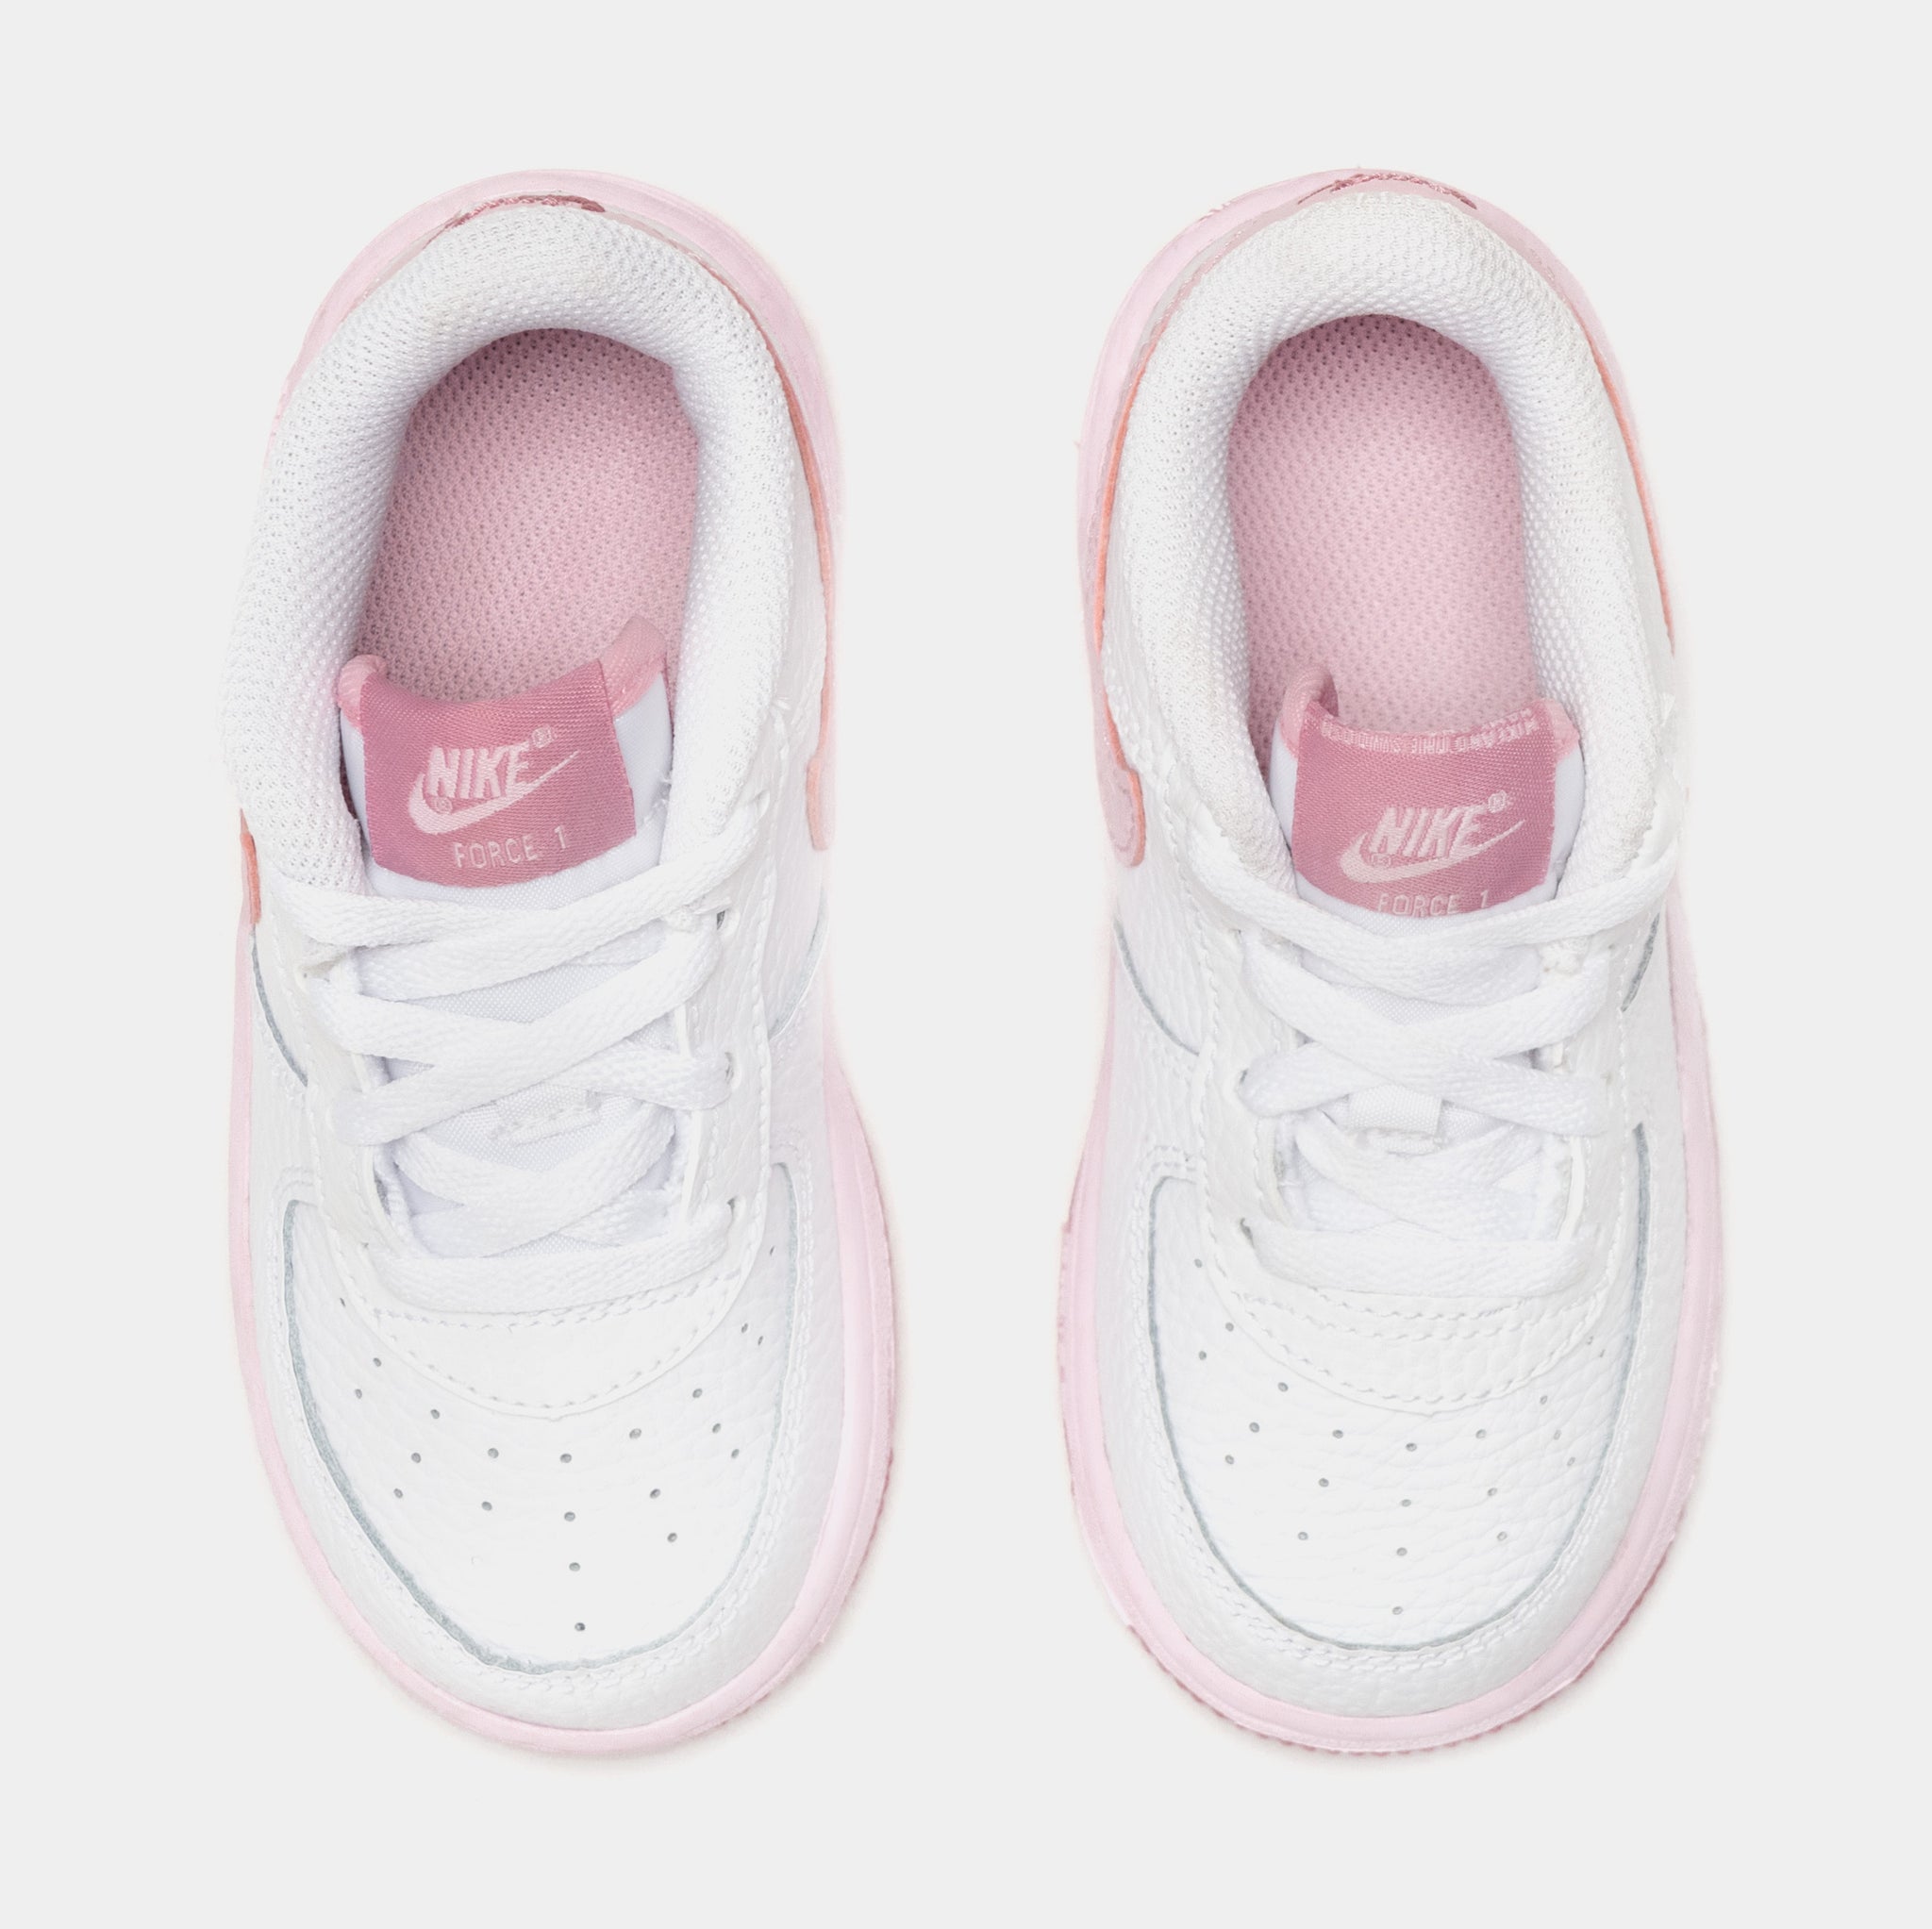 Sneakers Release- Kids’ Nike Force 1 “White/Sail